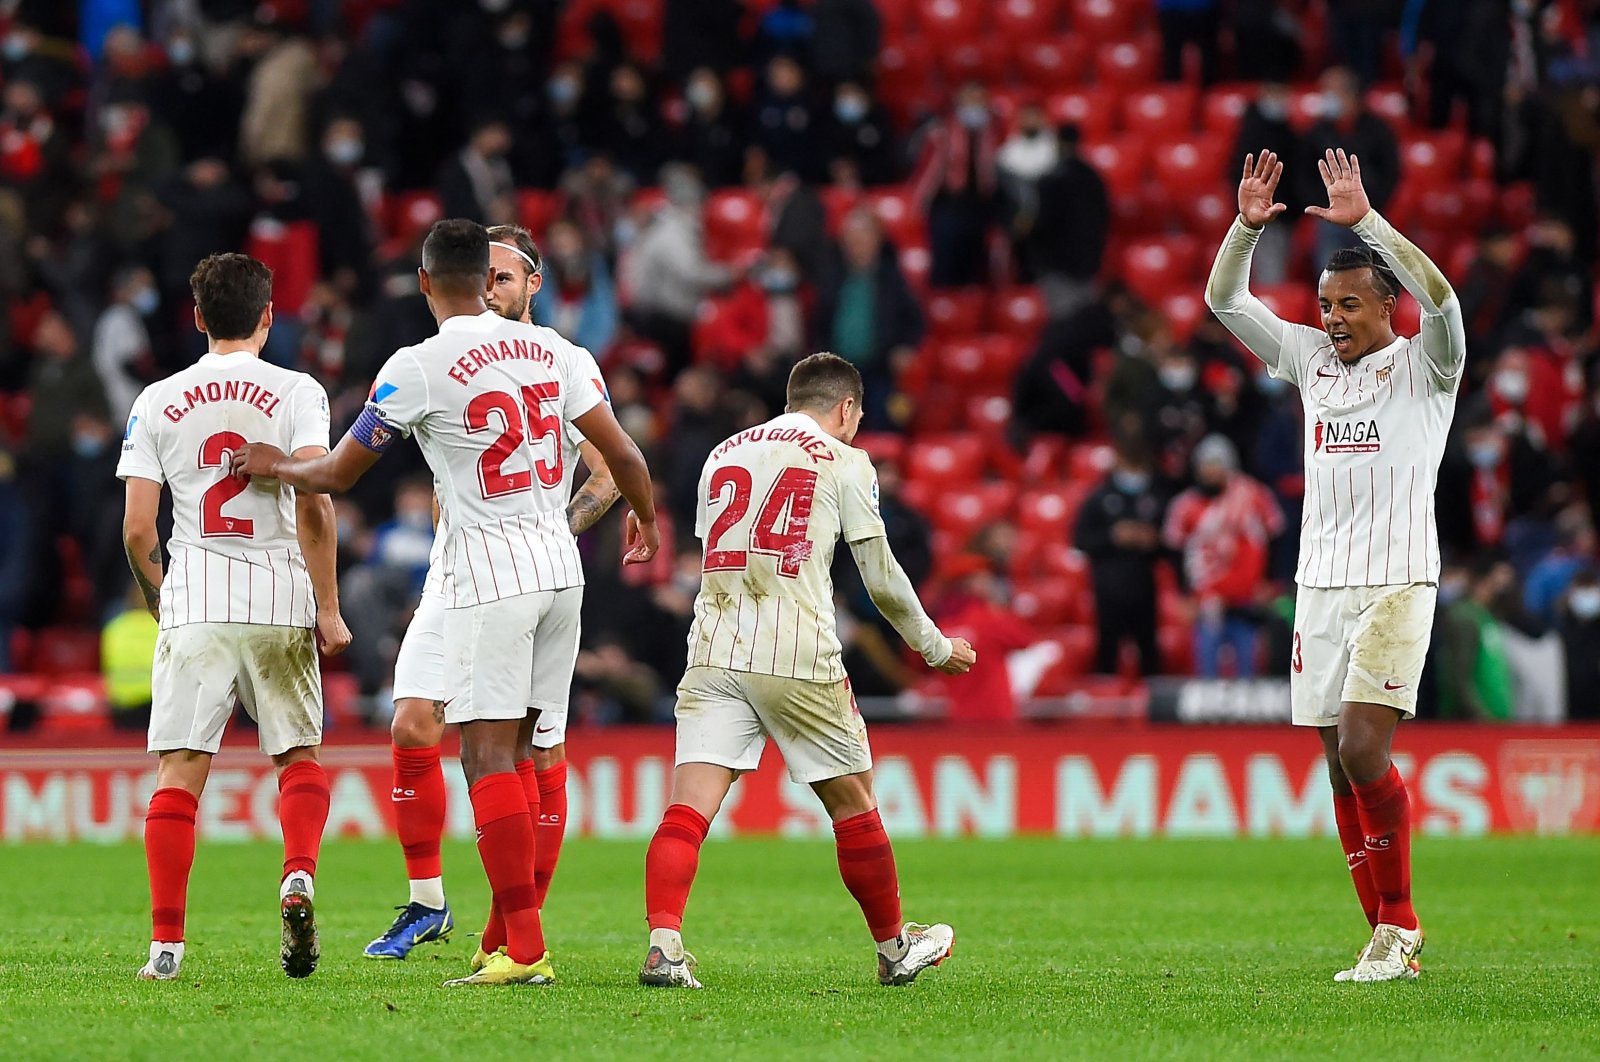 Sevilla&#039;s players celebrate after winning the match against Athletic Club Bilbao, in Bilbao, Spain, Dec. 11, 2021. (AFP PHOTO) 